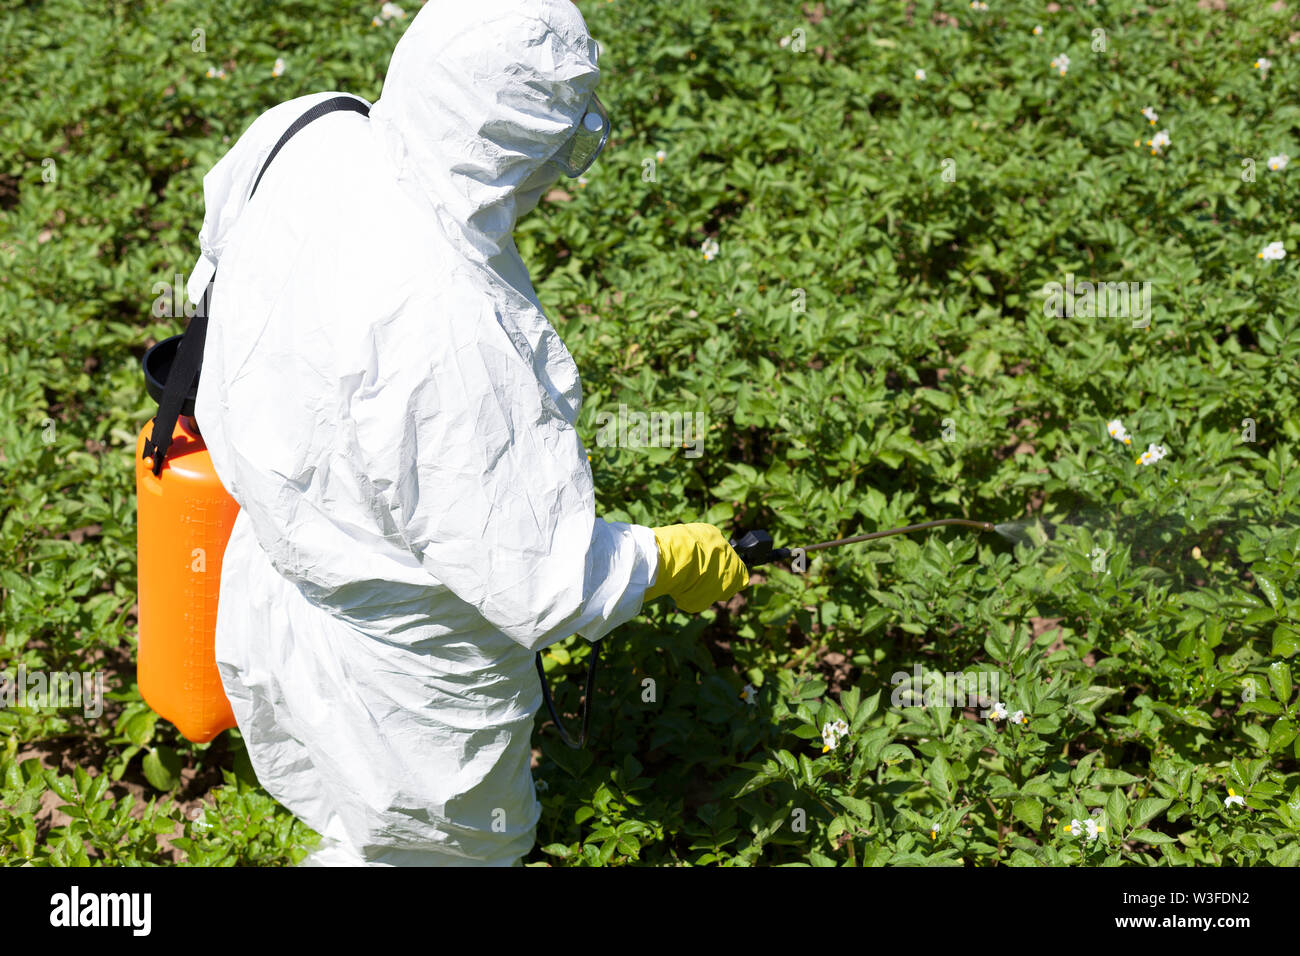 Herbicides Pesticides Or Insecticides Spraying Non Organic